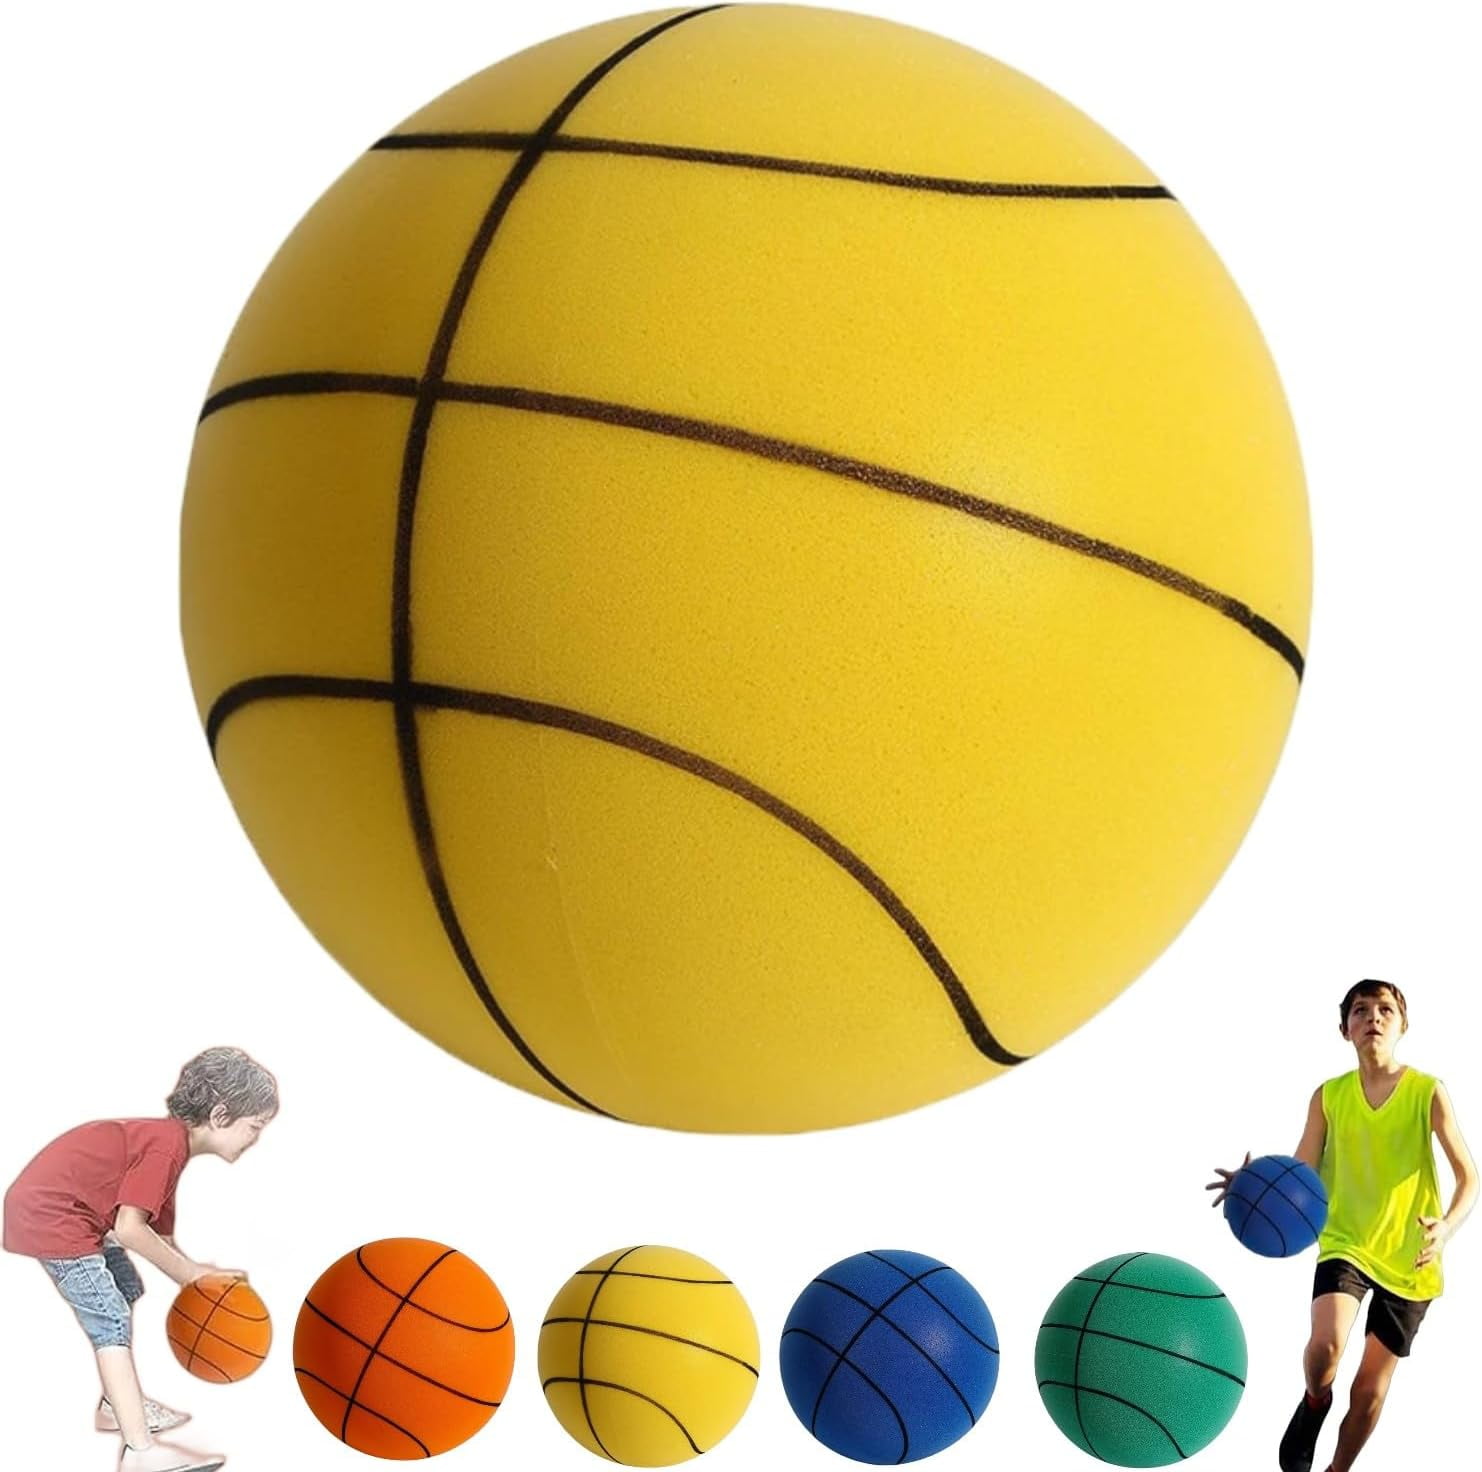 Ameiqa Silent Basketball, Silent Basketball Dribbling Indoor Foam  Basketball, Indoor Training Ball, Easy to Grip Quiet Ball for Various  Indoor